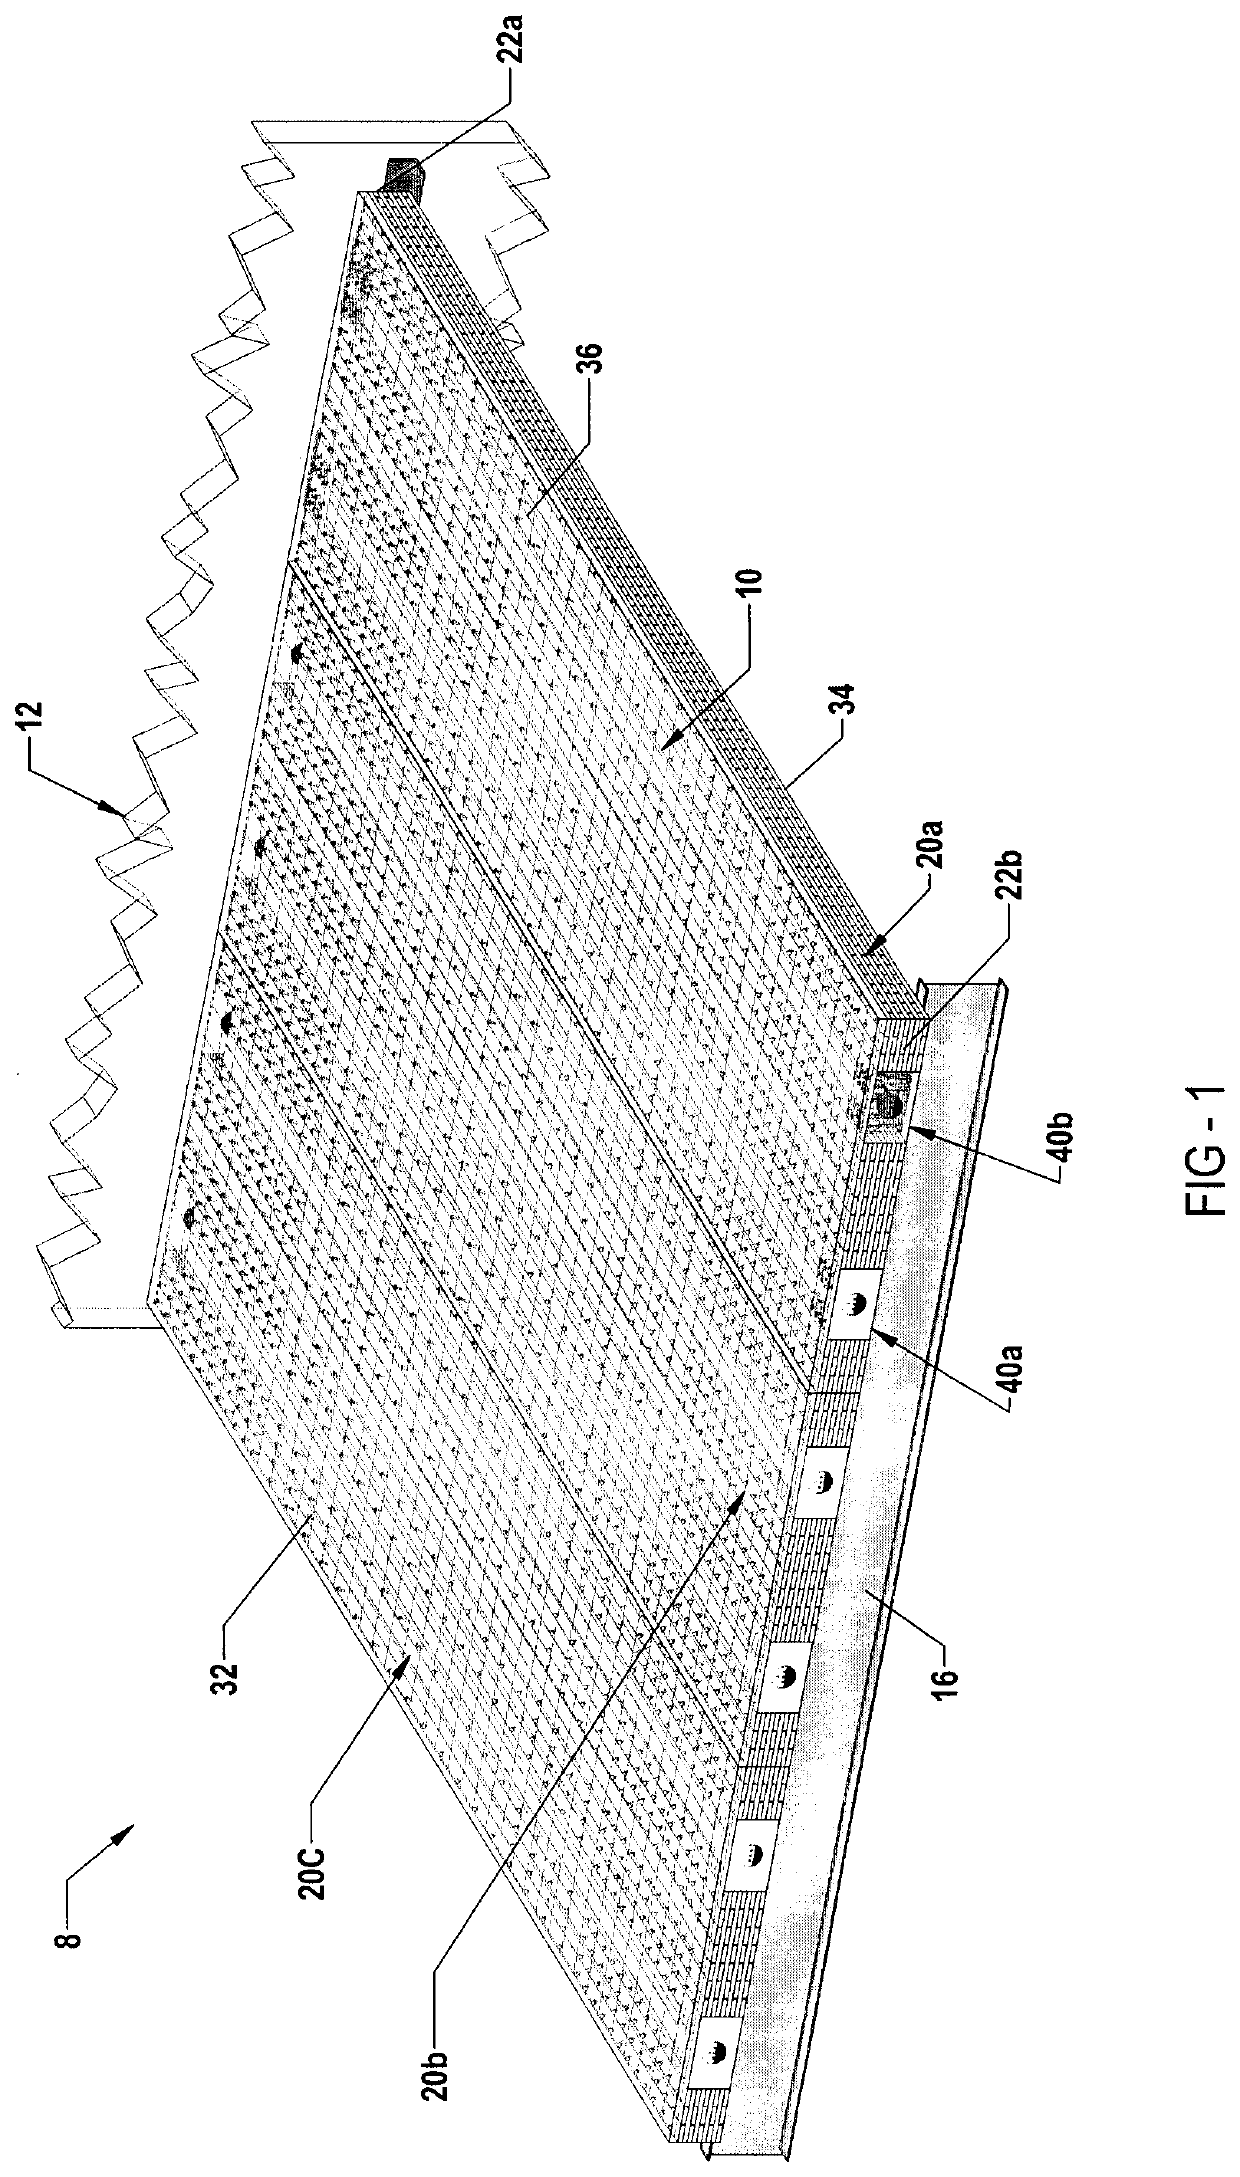 Cellulose-based structural flooring panel assembly